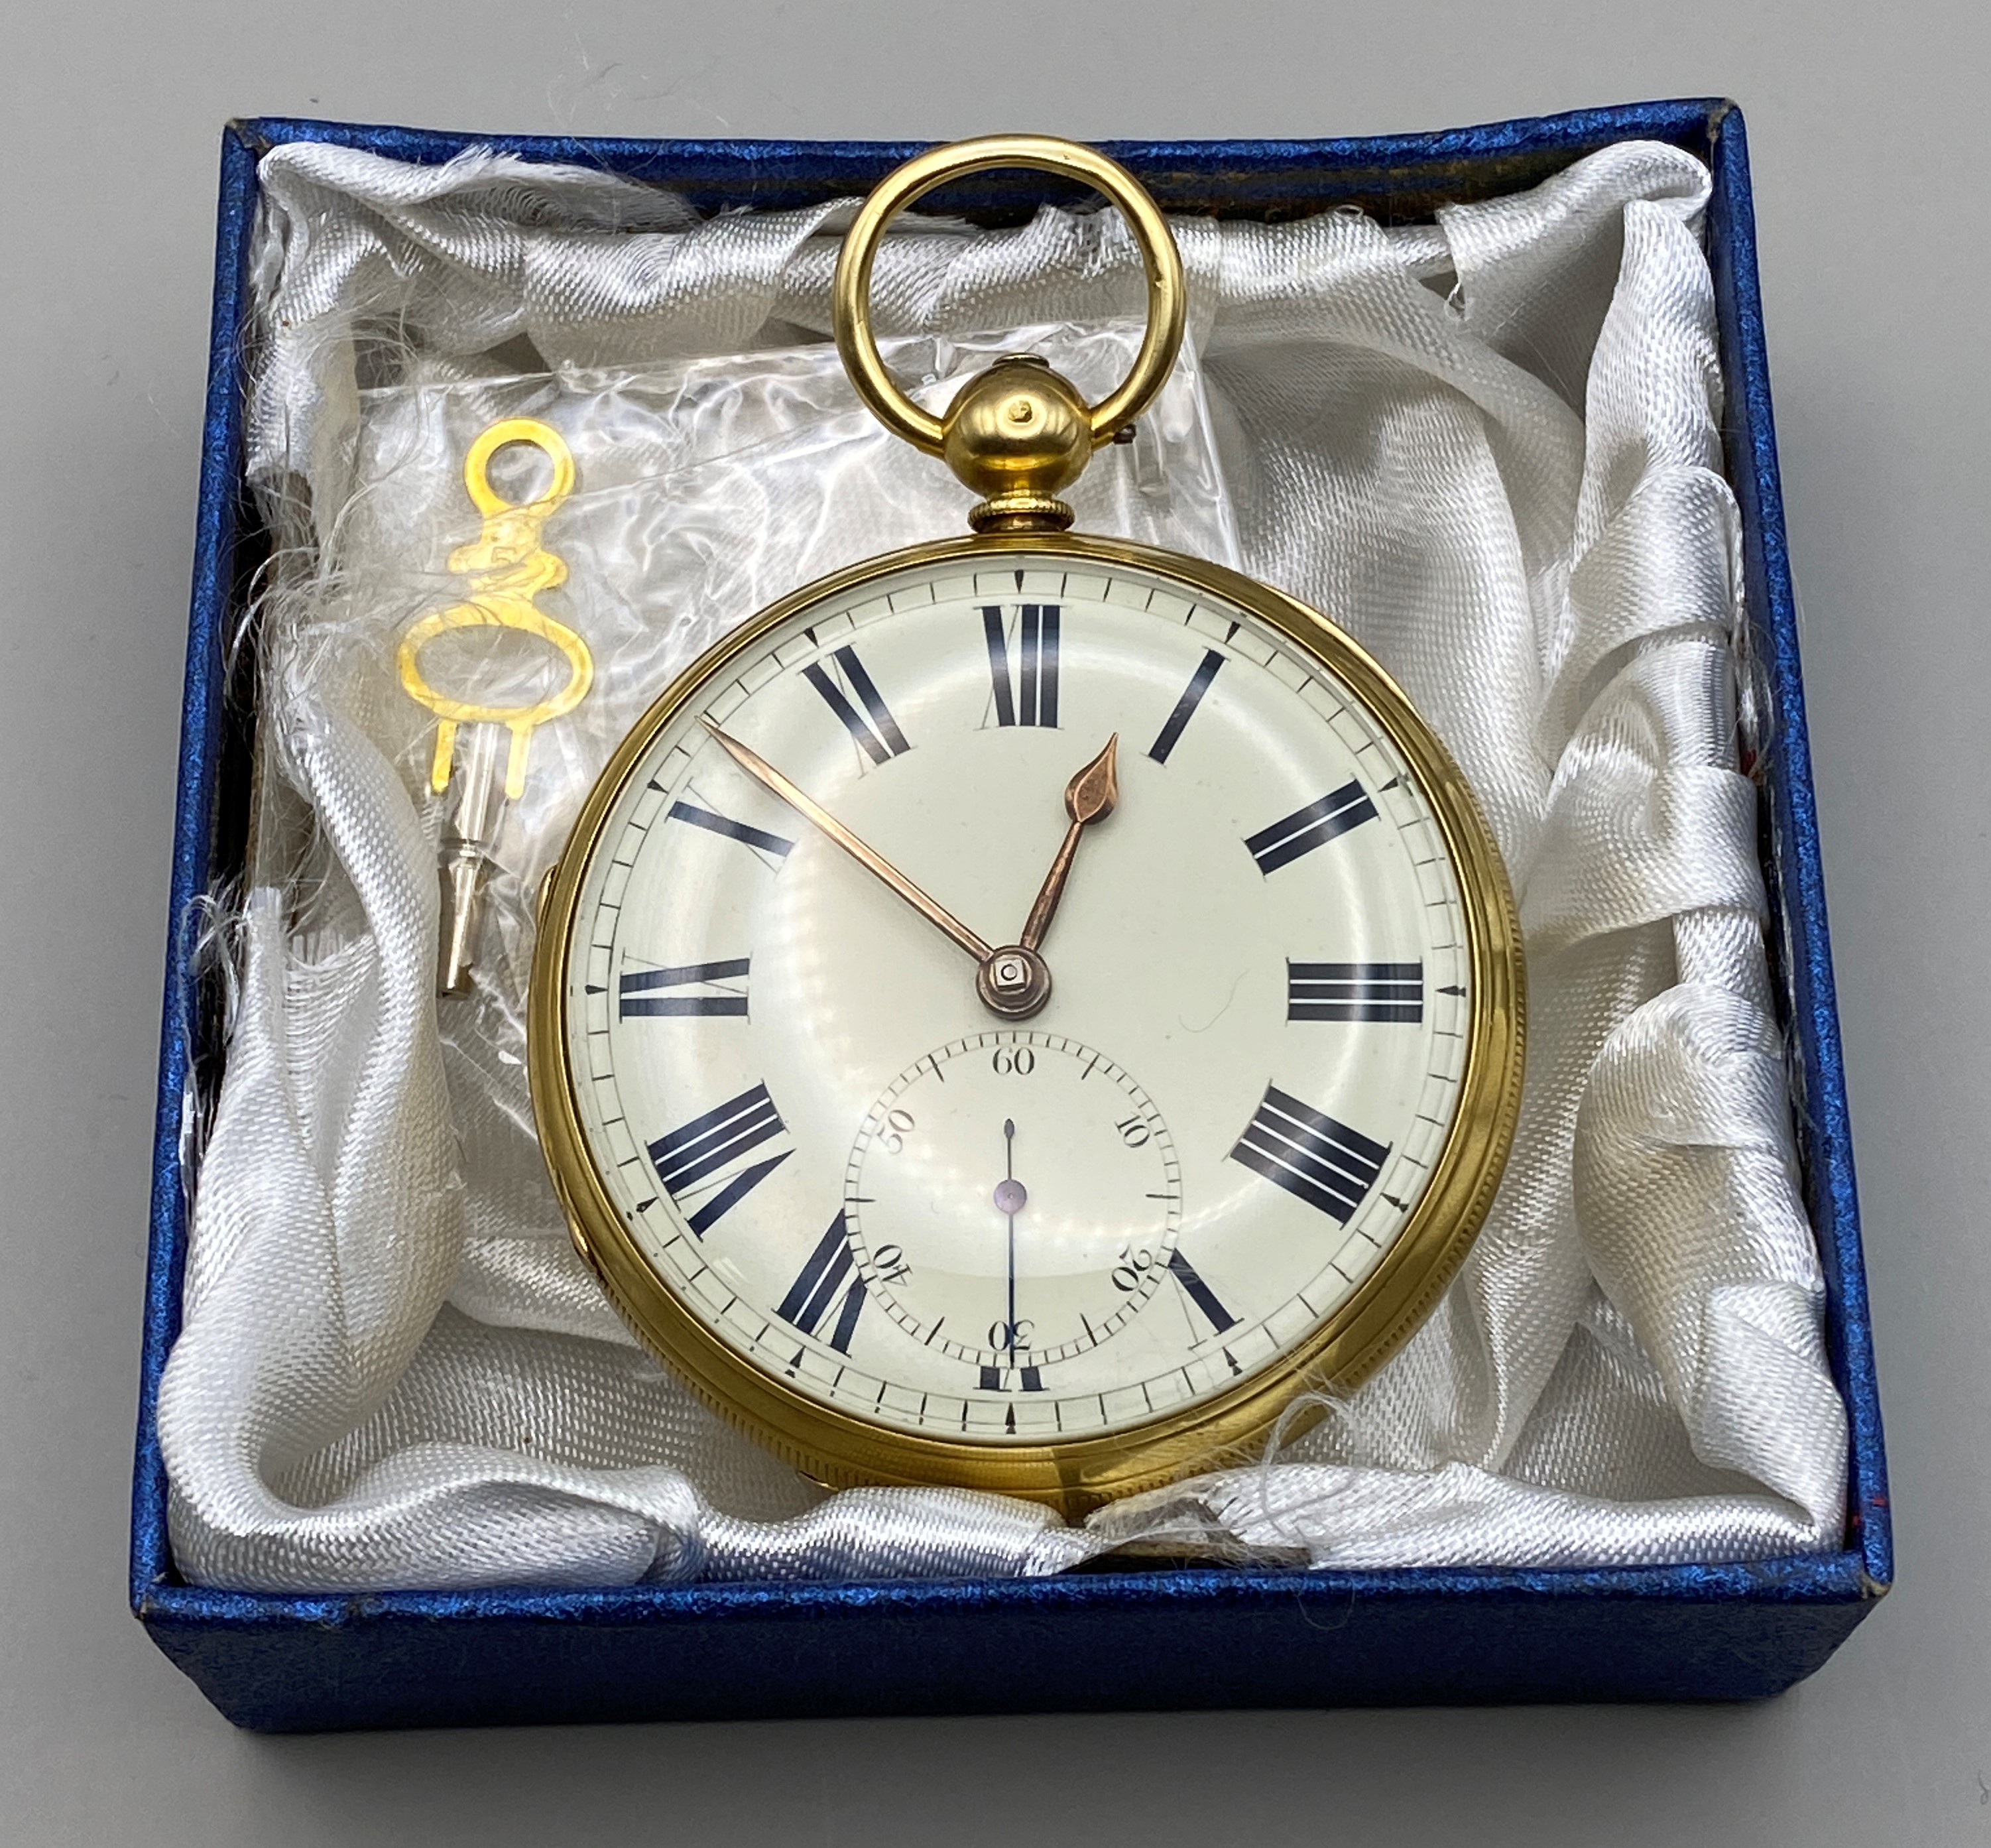 18ct Gold Fusee Pocket Watch by Gammon of Birmingham '1685', No.3584. - Image 42 of 48